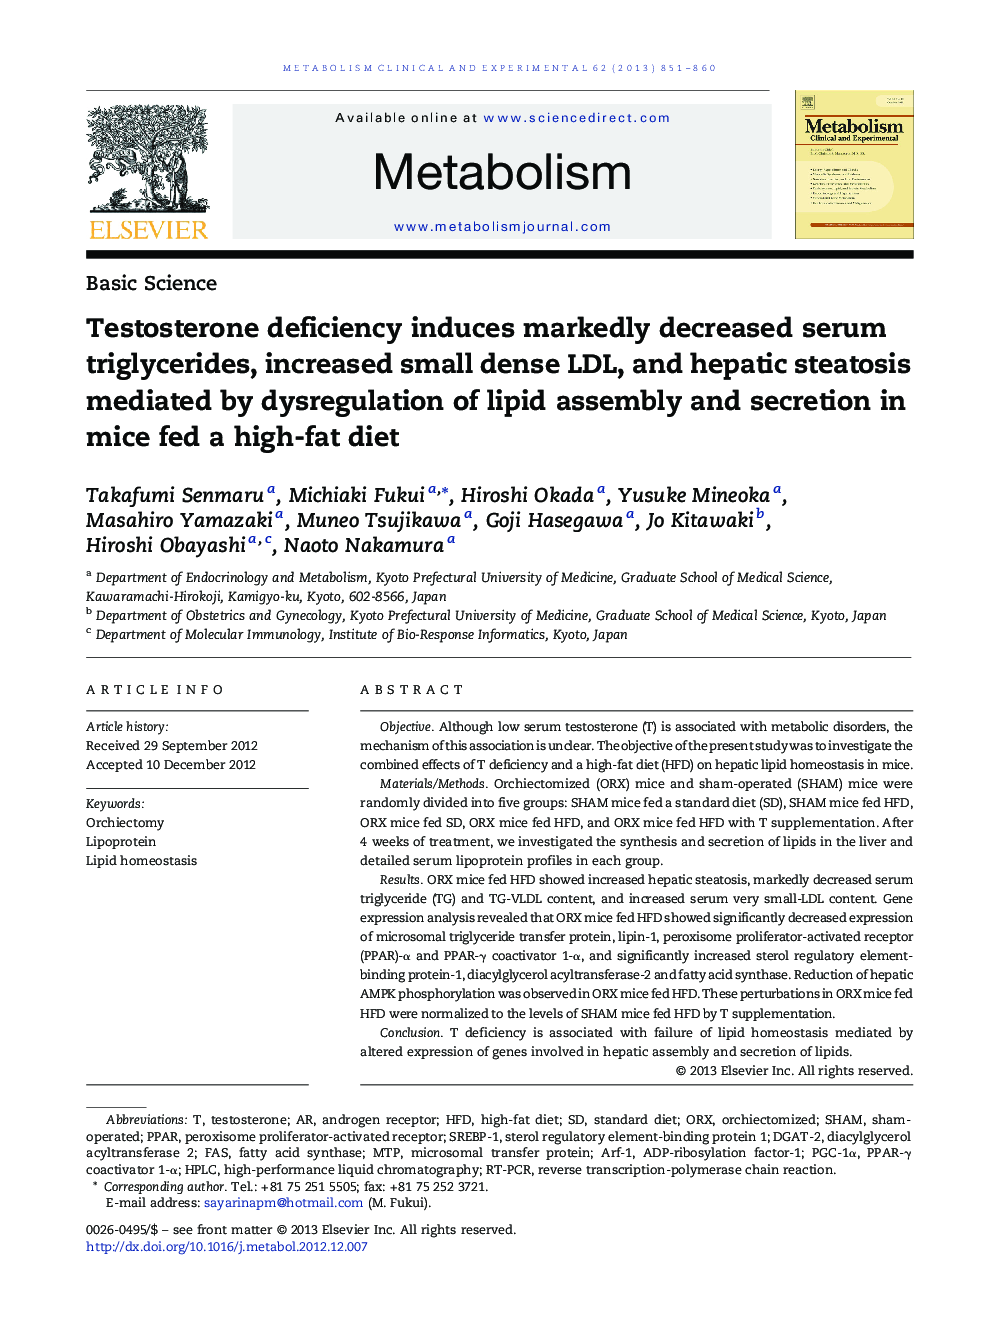 Testosterone deficiency induces markedly decreased serum triglycerides, increased small dense LDL, and hepatic steatosis mediated by dysregulation of lipid assembly and secretion in mice fed a high-fat diet